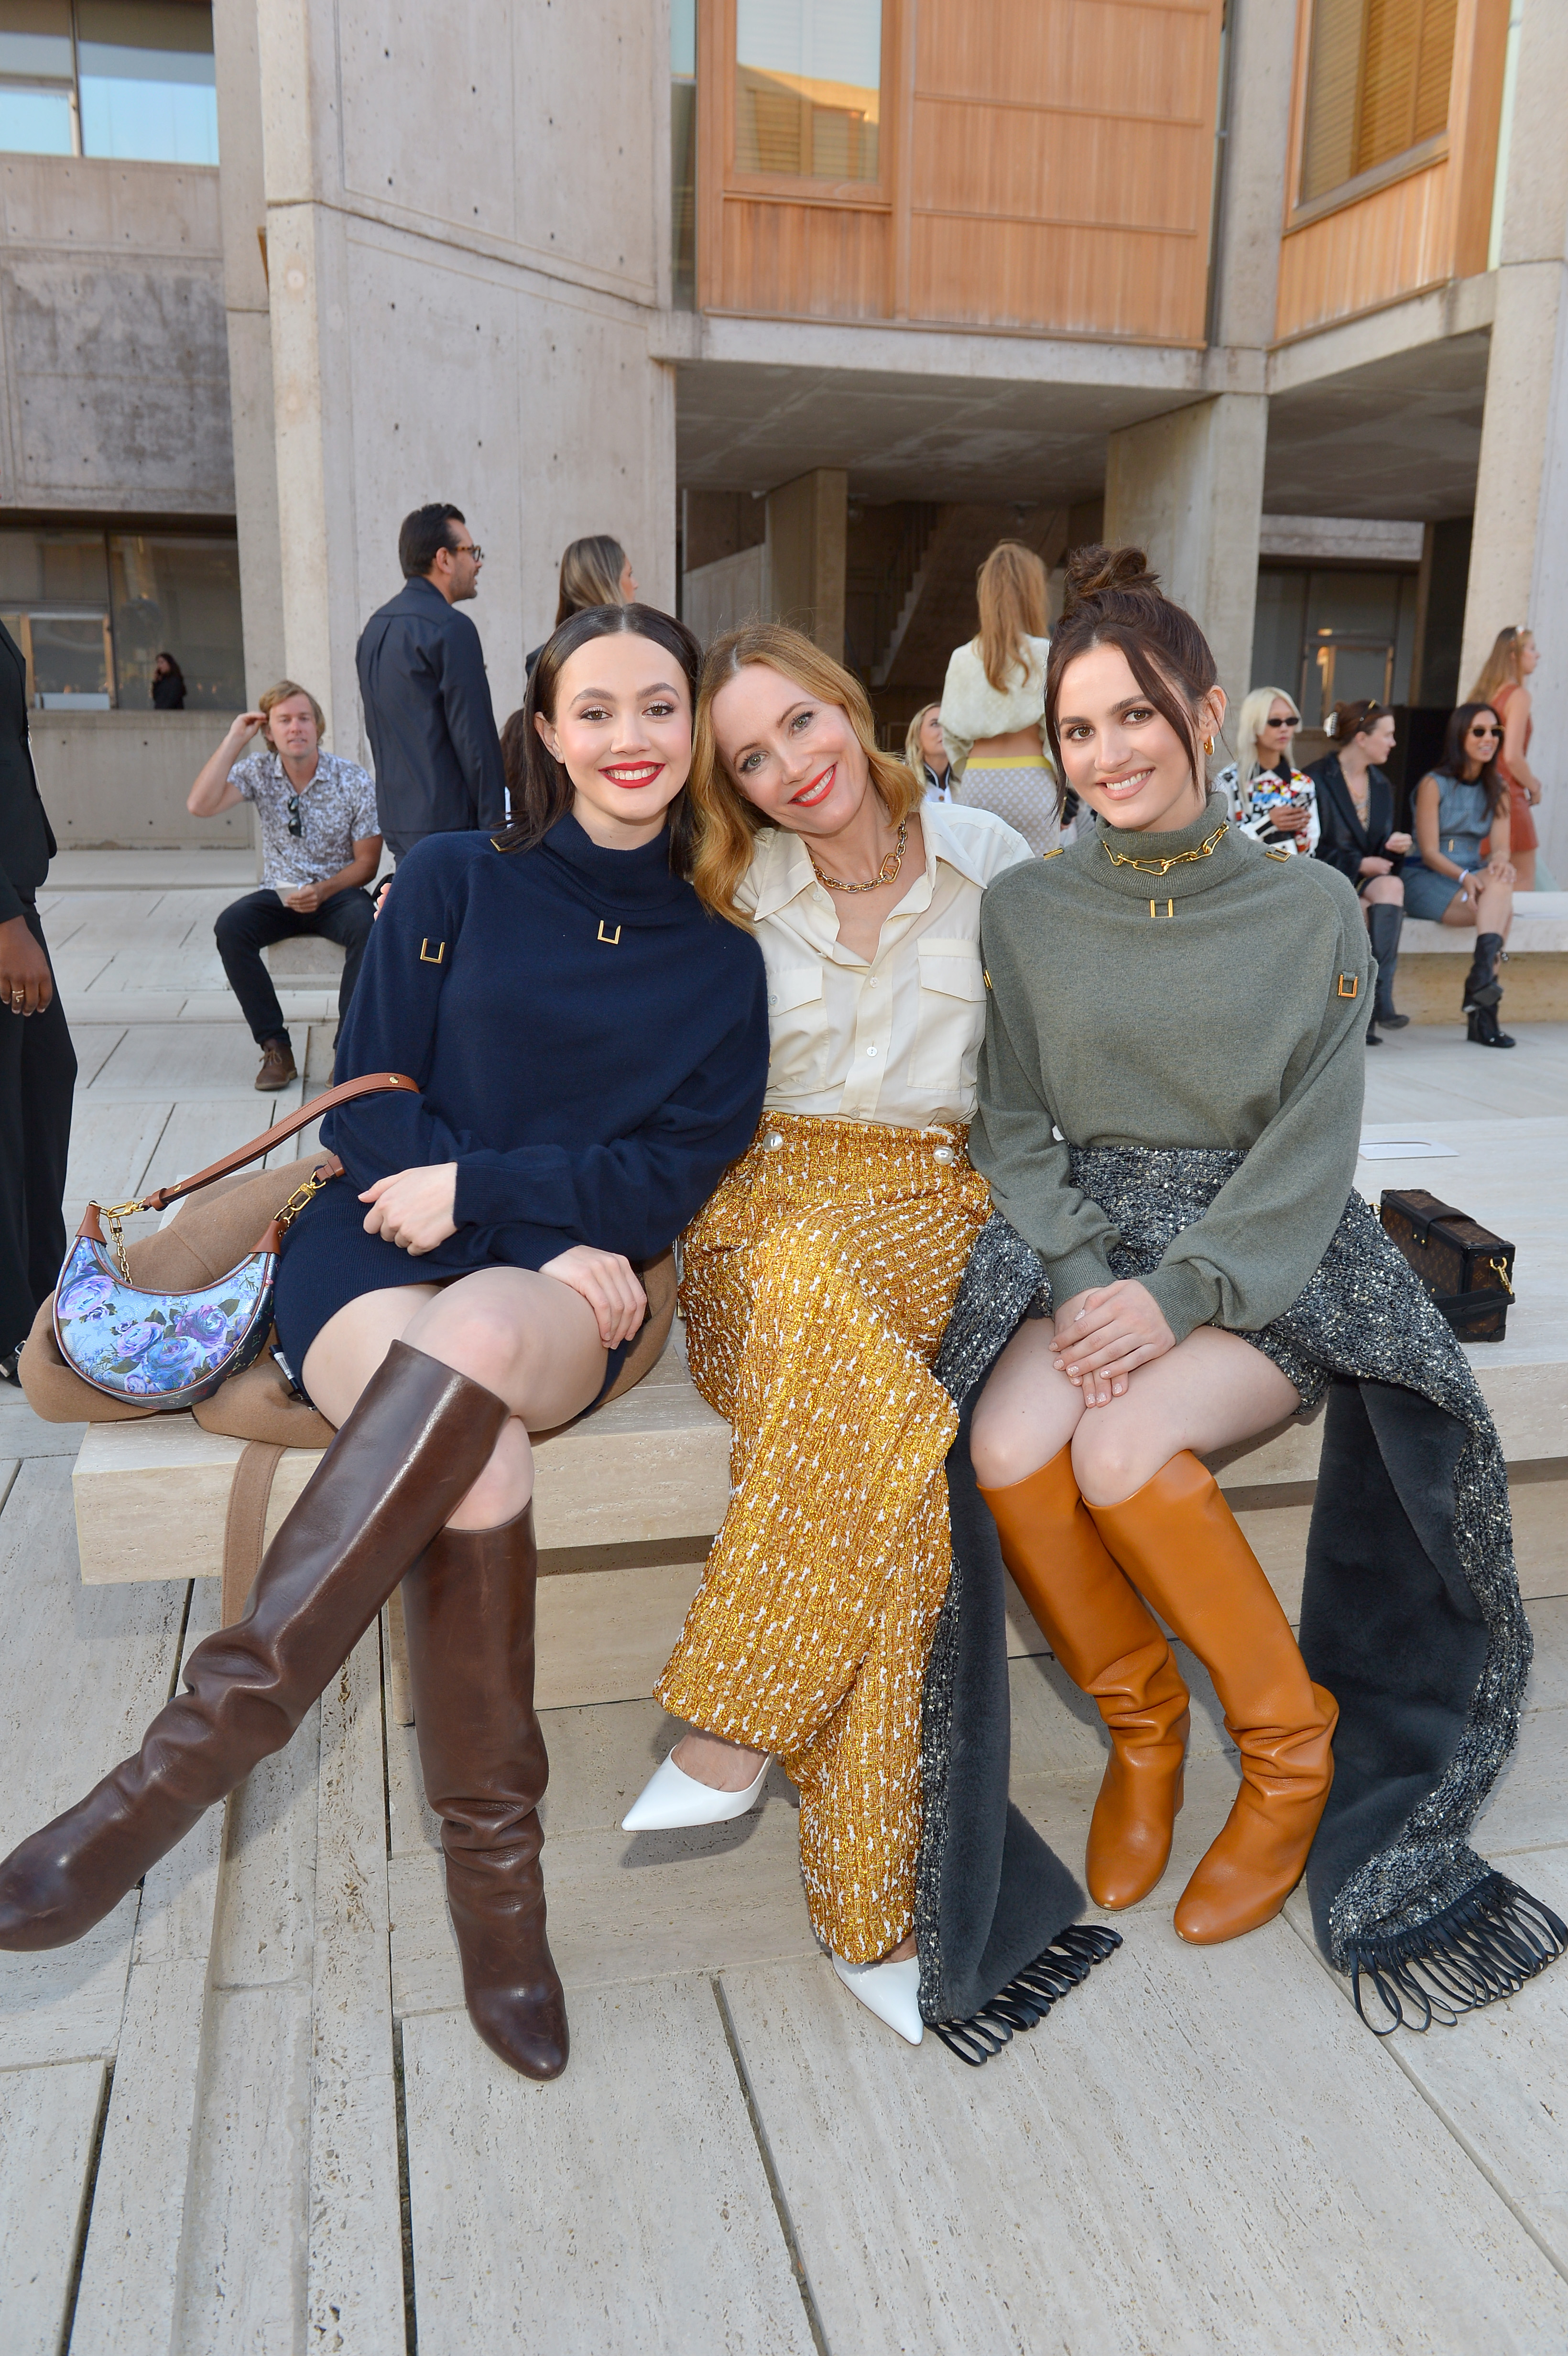 This Is 40 Photo with Leslie Mann and Daughters Maude and Iris Apatow